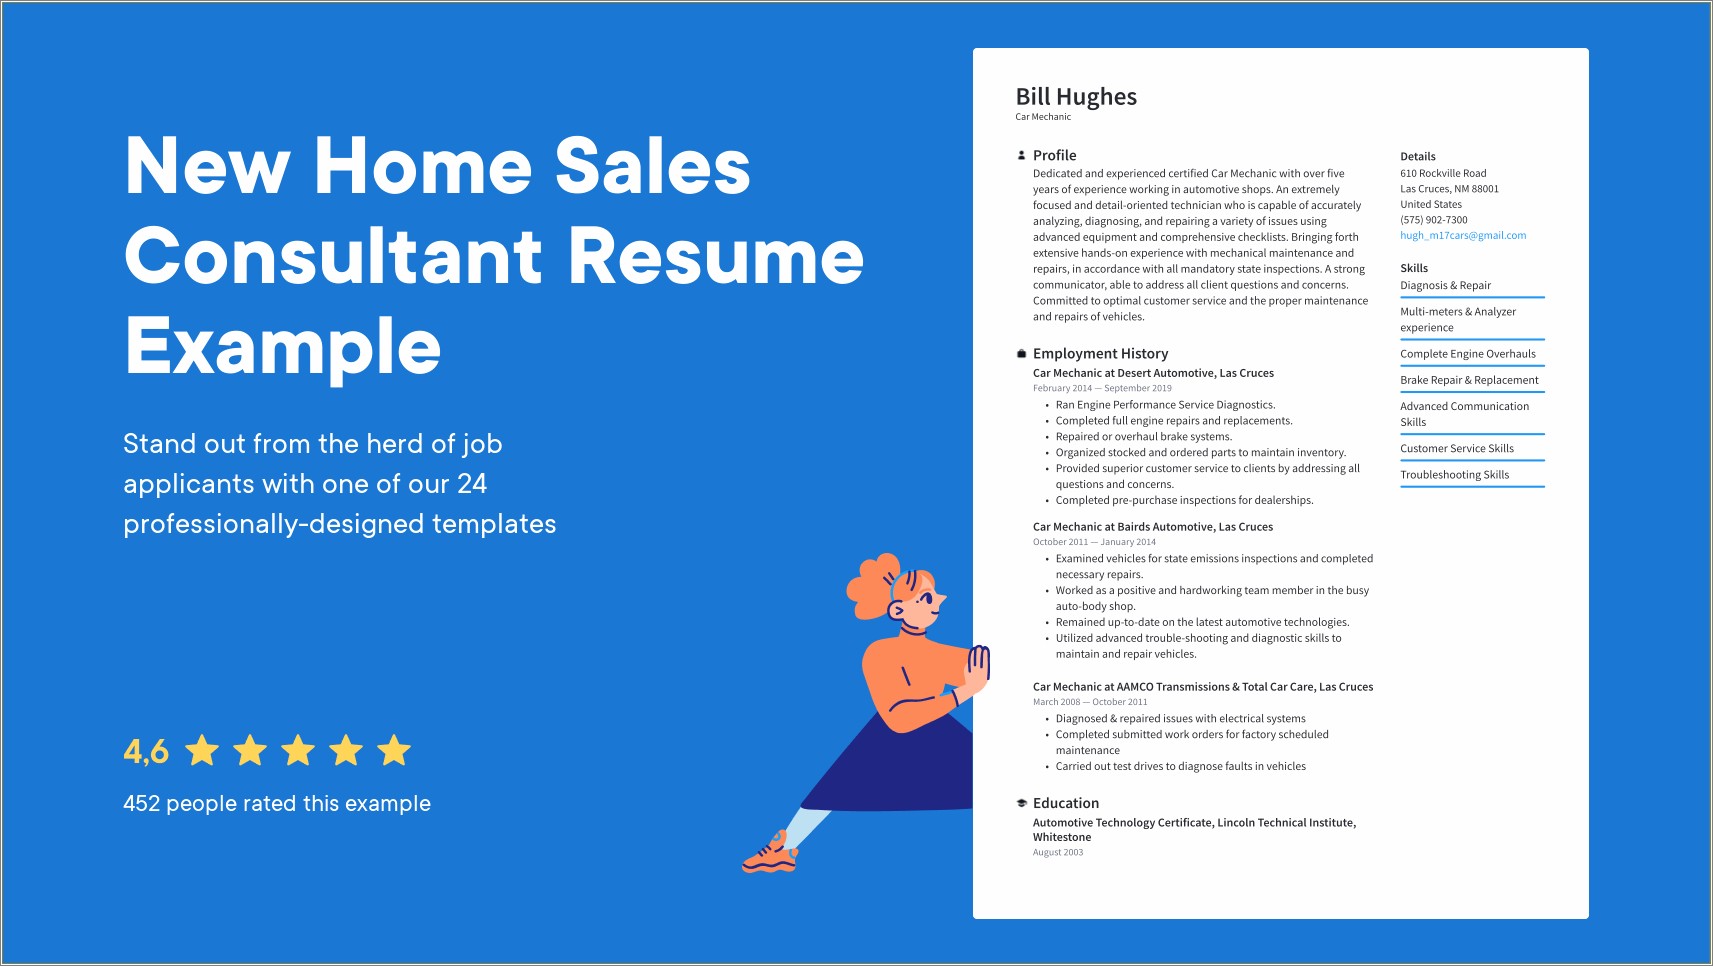 New Home Sales Consultant Resume Sample